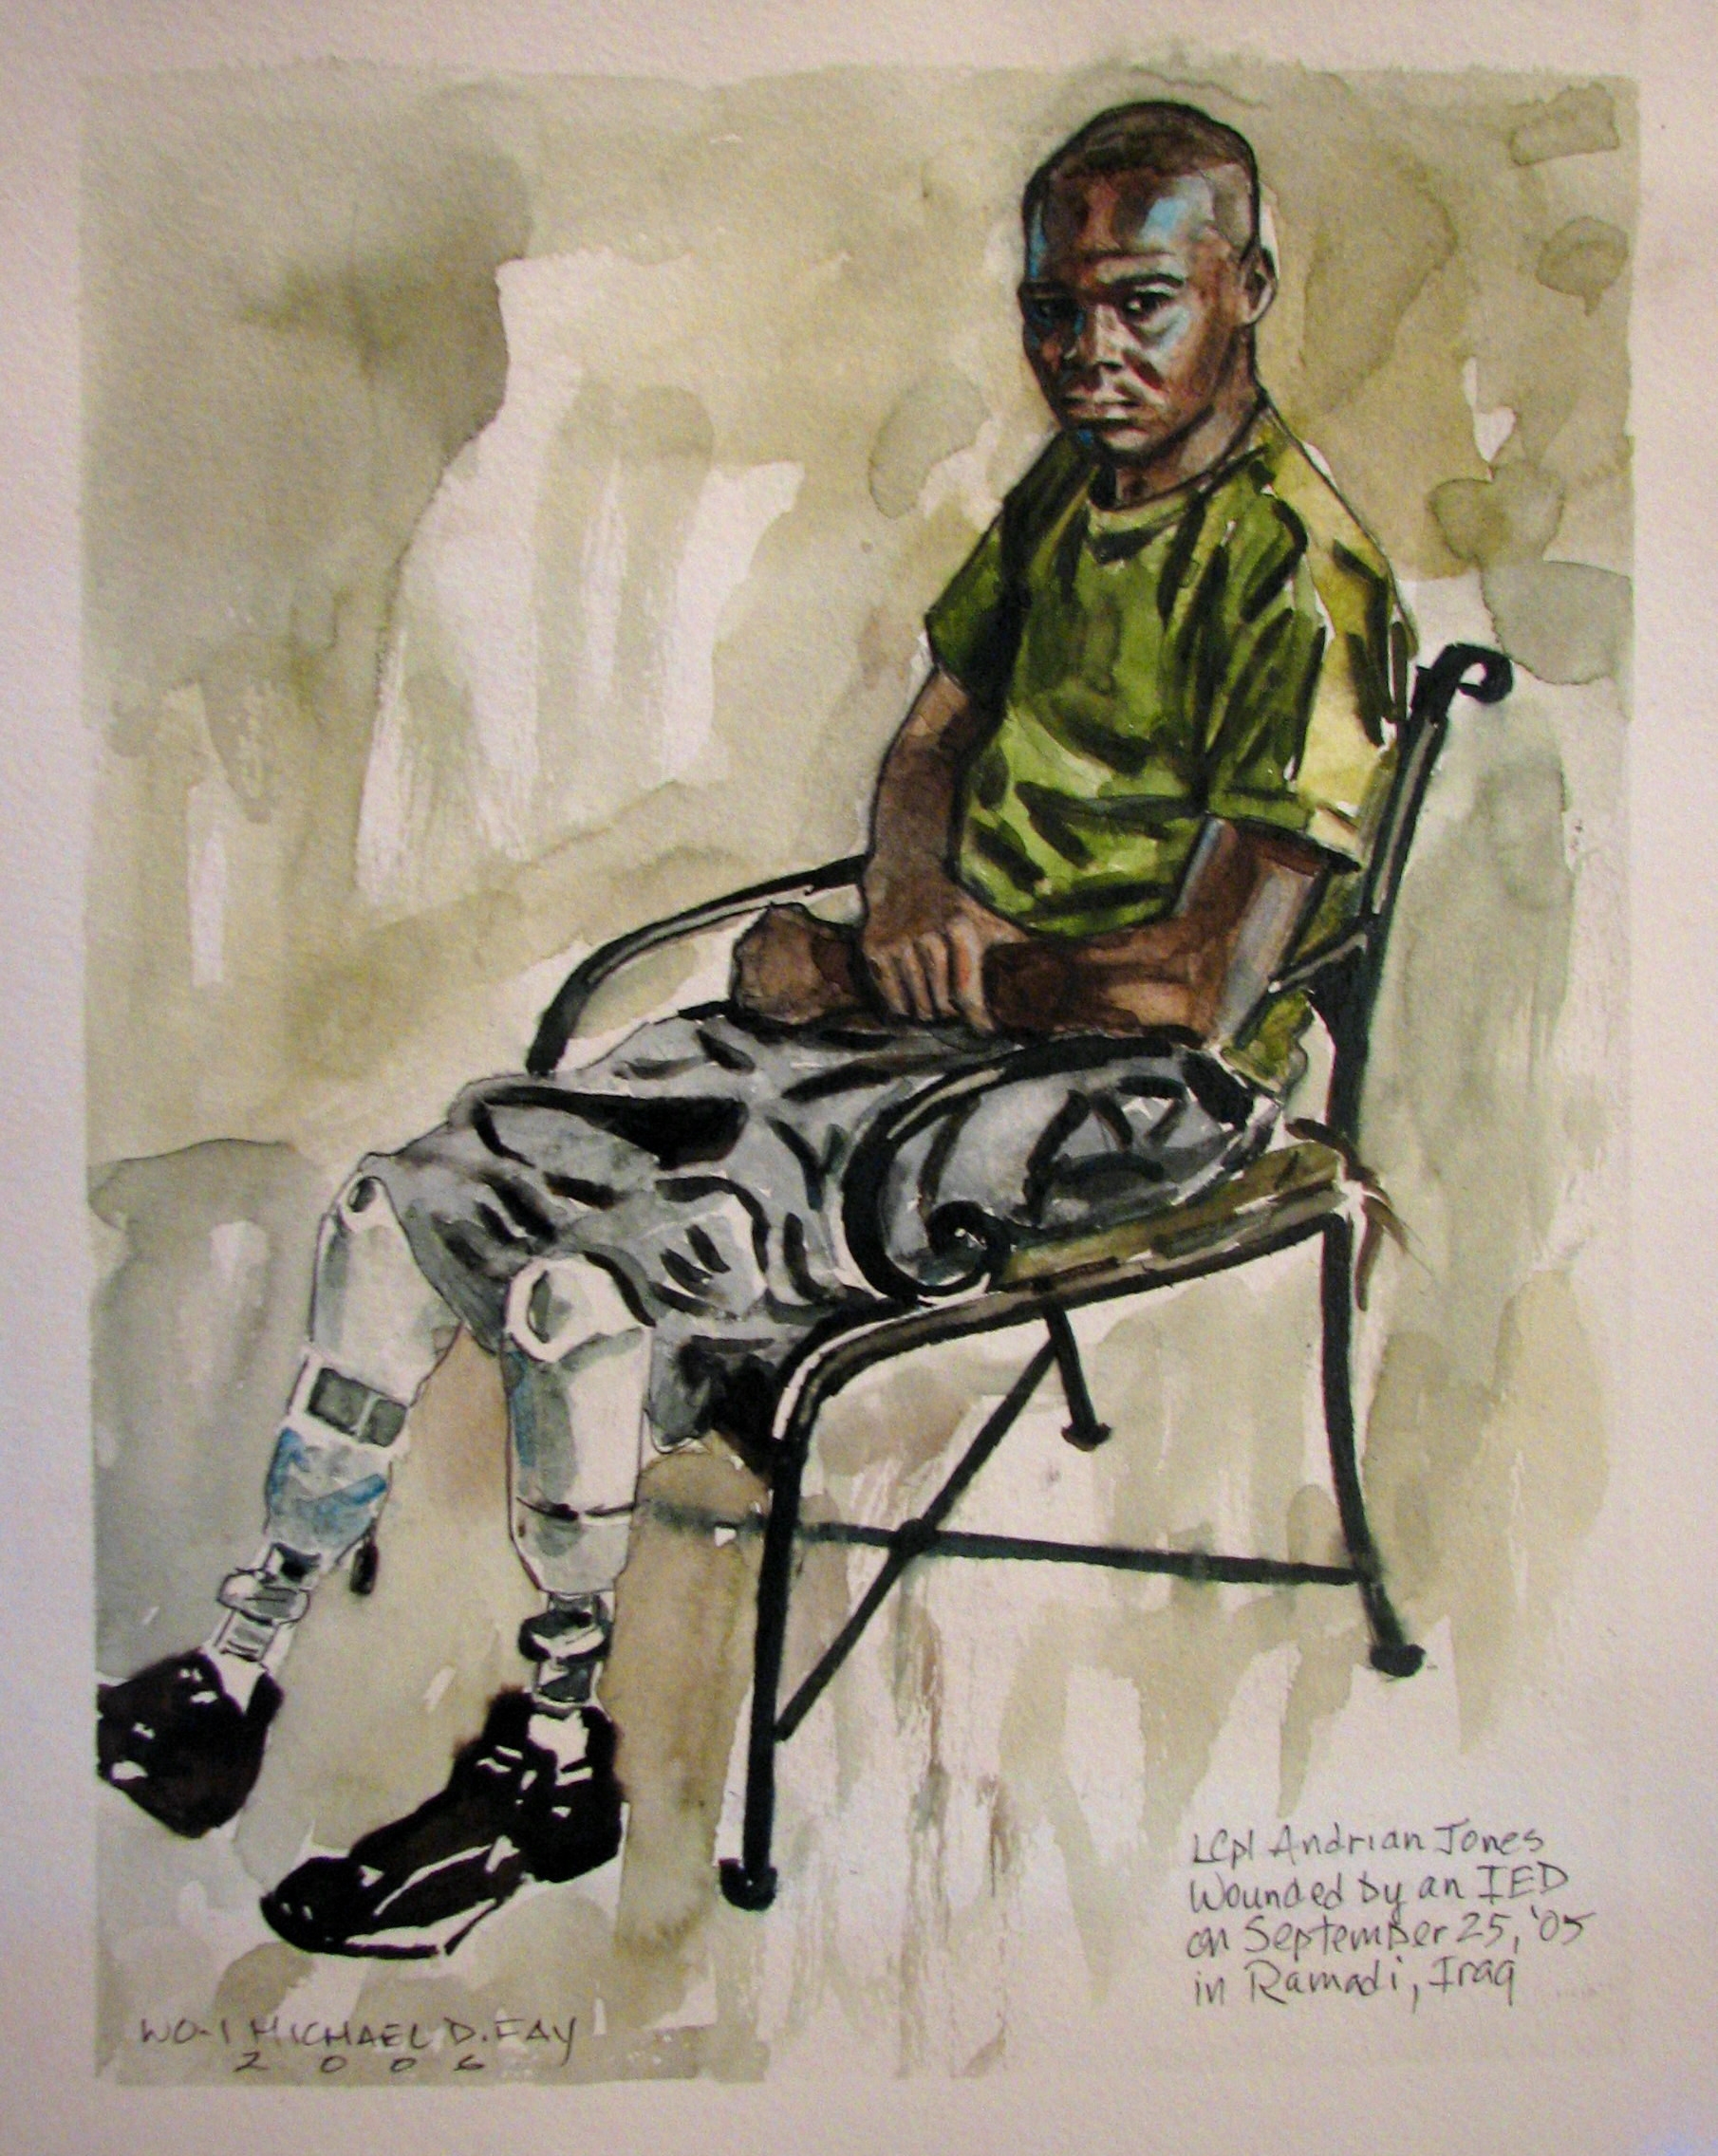 Artist Mike Fay's work showing LCpl Andrian Jones, who was wounded by an IED Sept. 2005 in Ramadi, Iraq